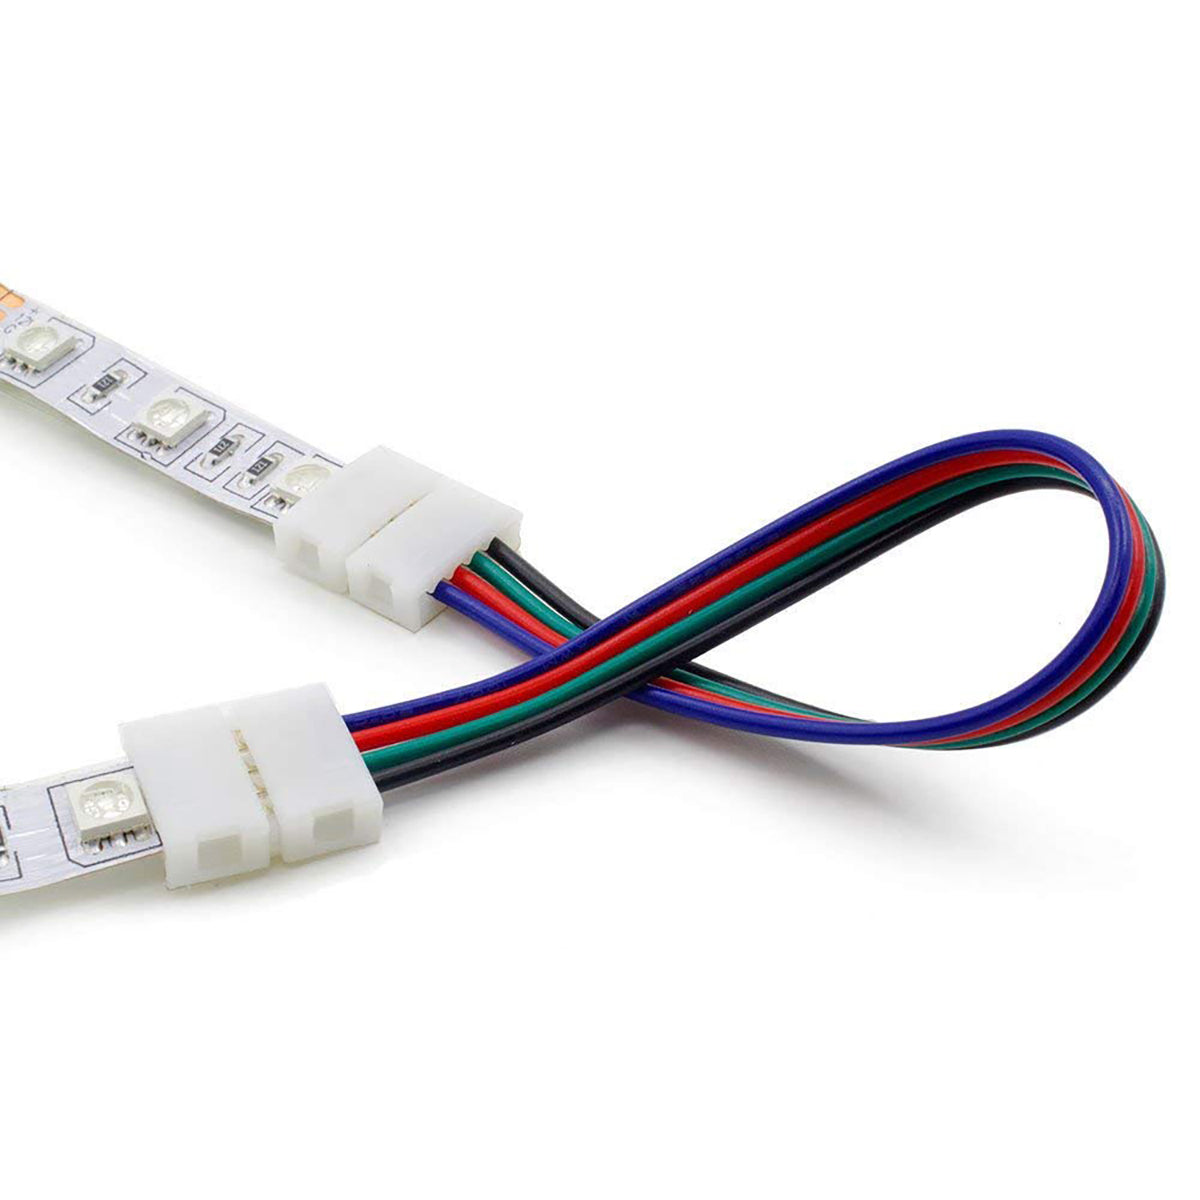 G.W.S LED Wholesale Strip Connectors 10mm / 5 4 Pin Wire Cable For 5050 LED RGB Strip Lights